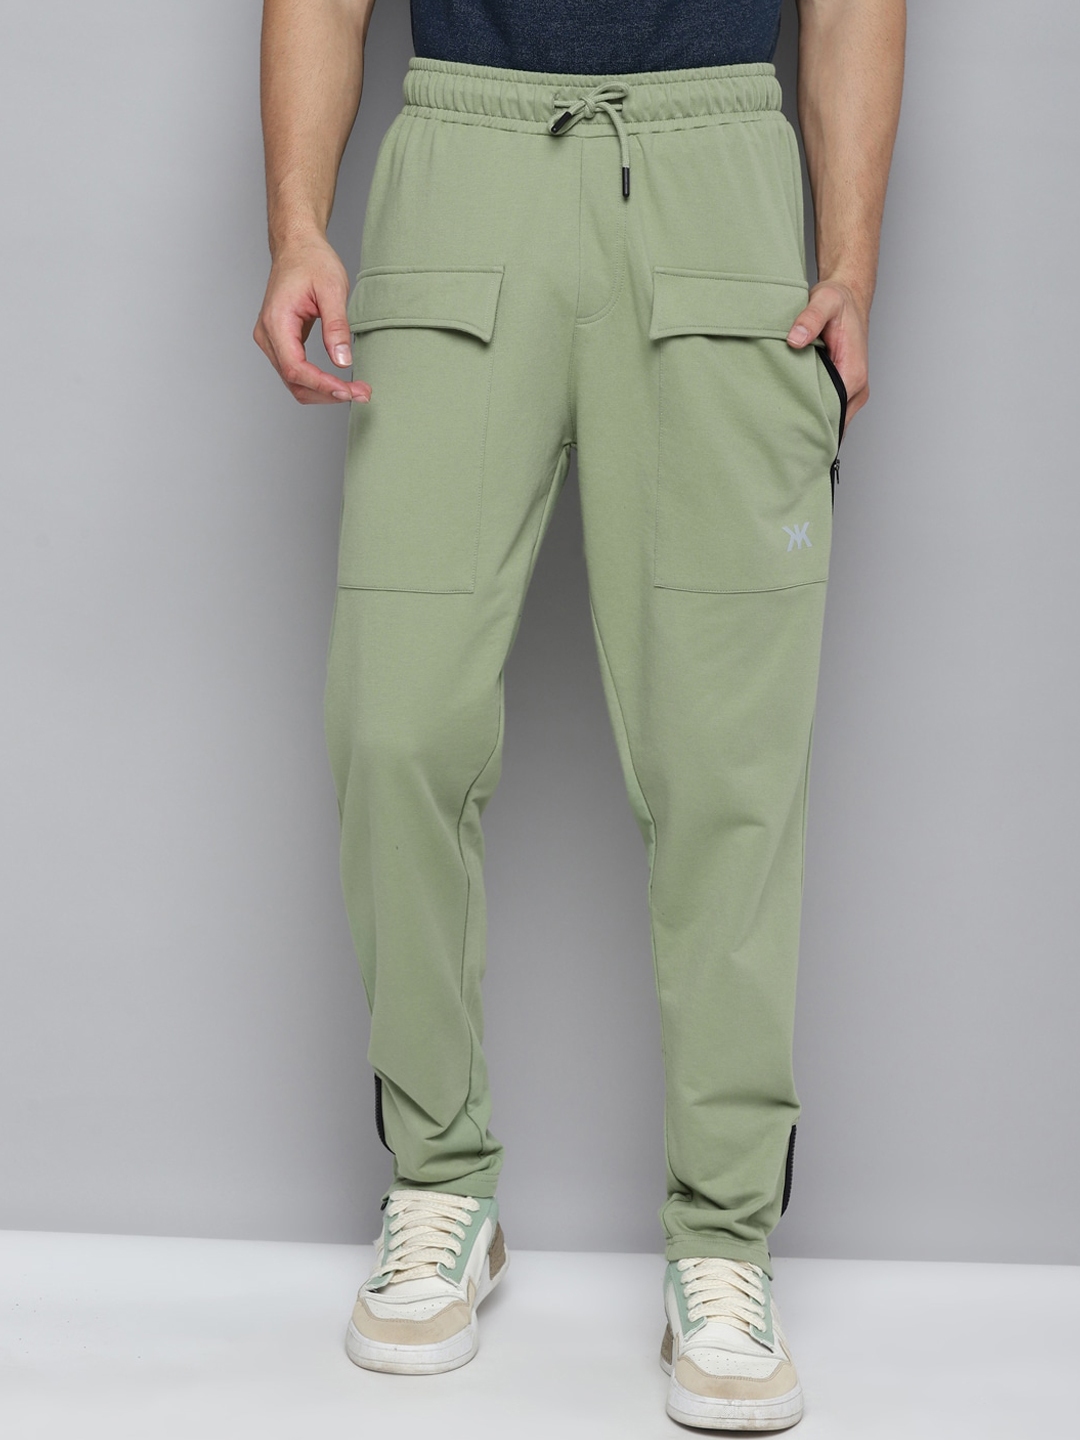 Buy RS BY ROCKY STAR Charcoal Boys 6 Pocket Solid Cargo Pants